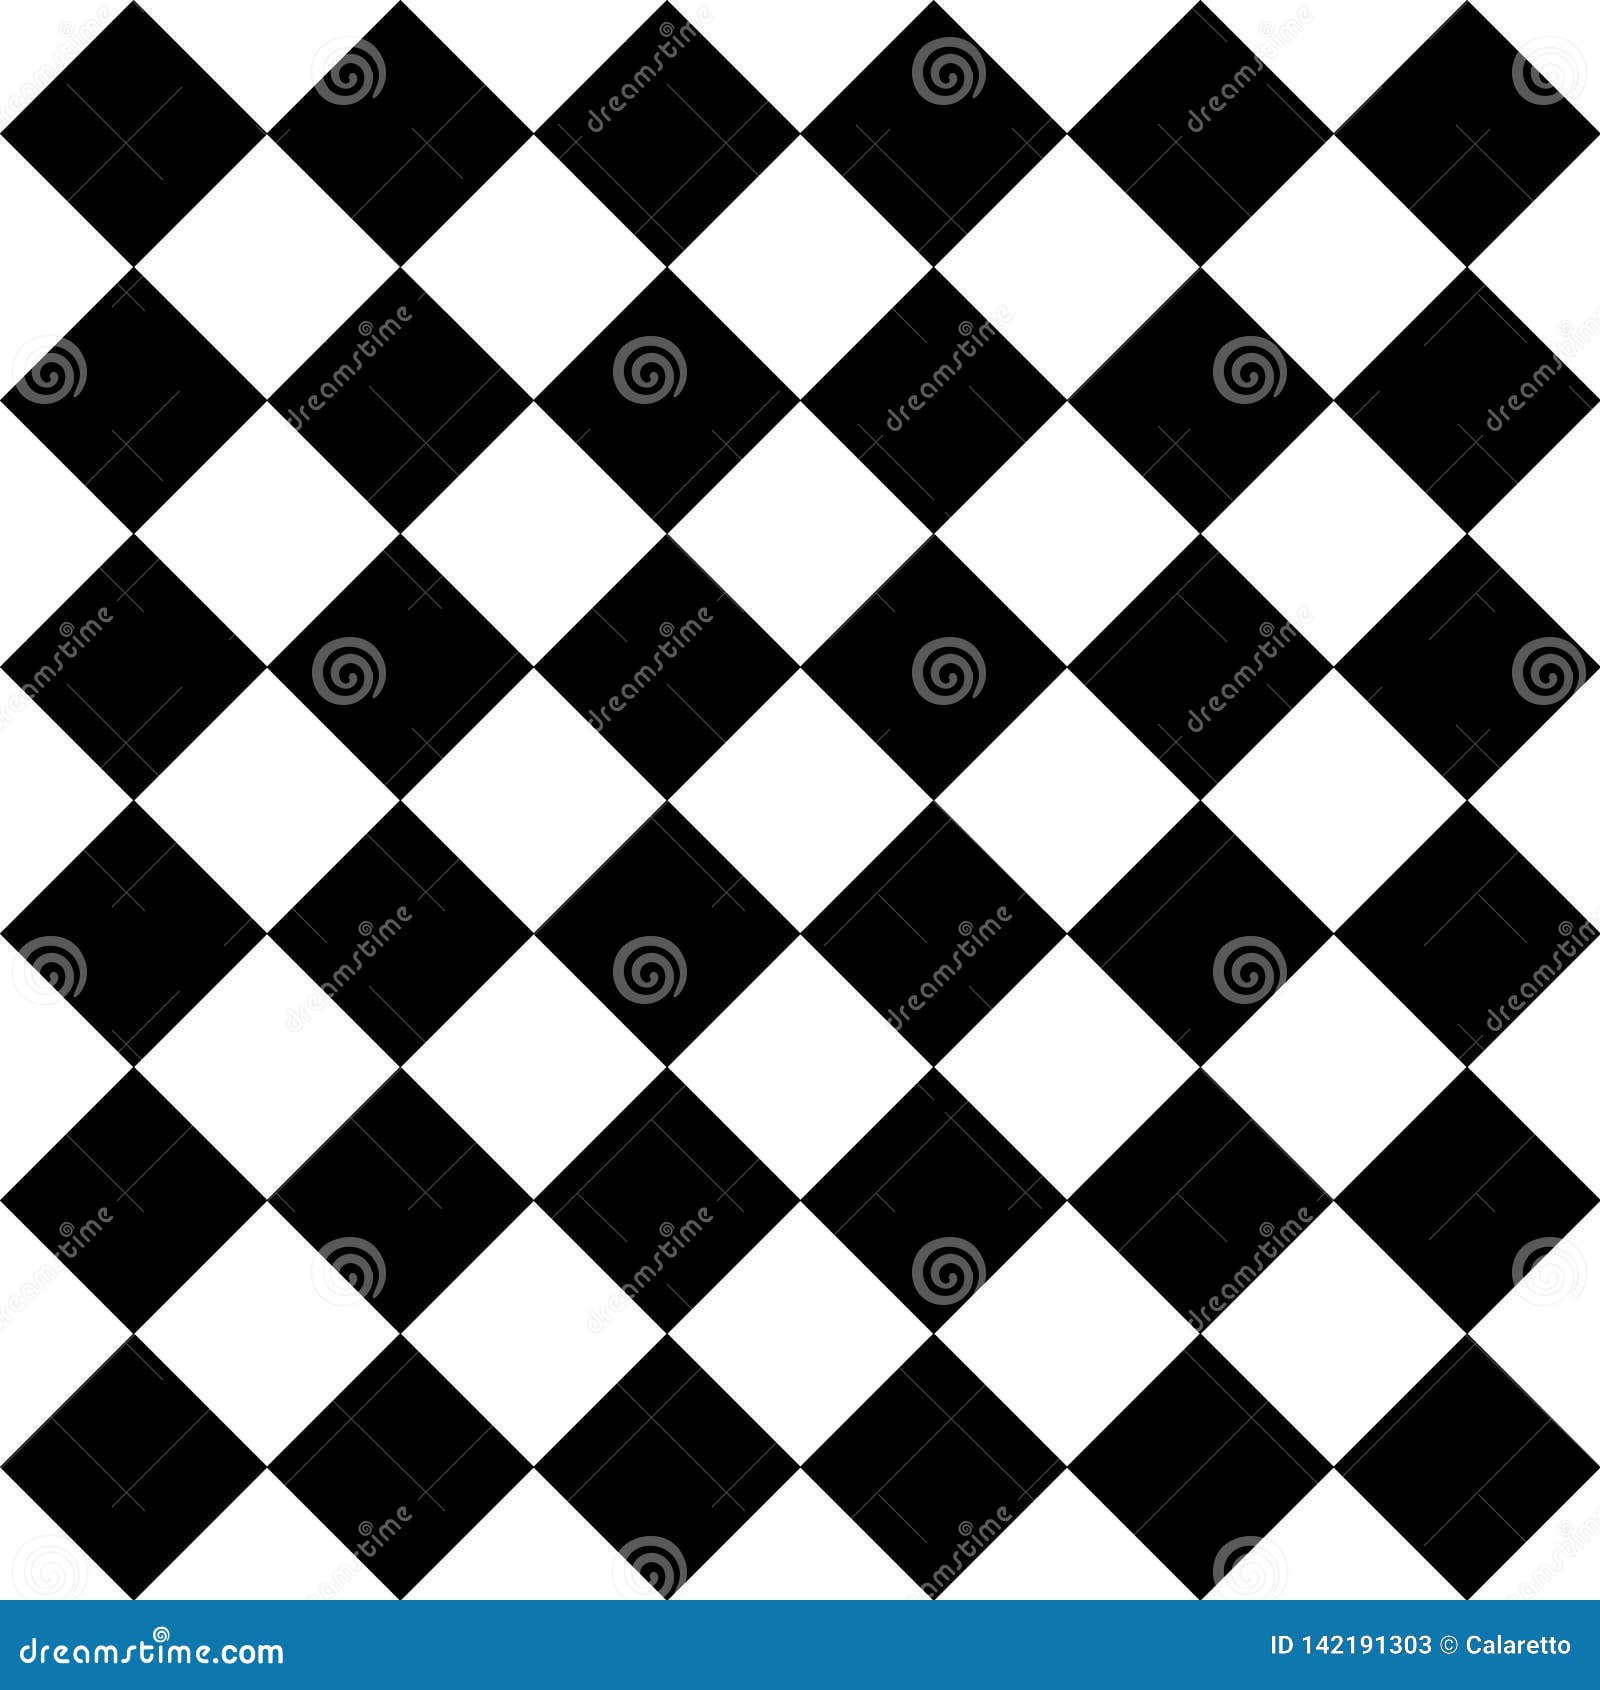 black and white square tiles checkered seamless pattern